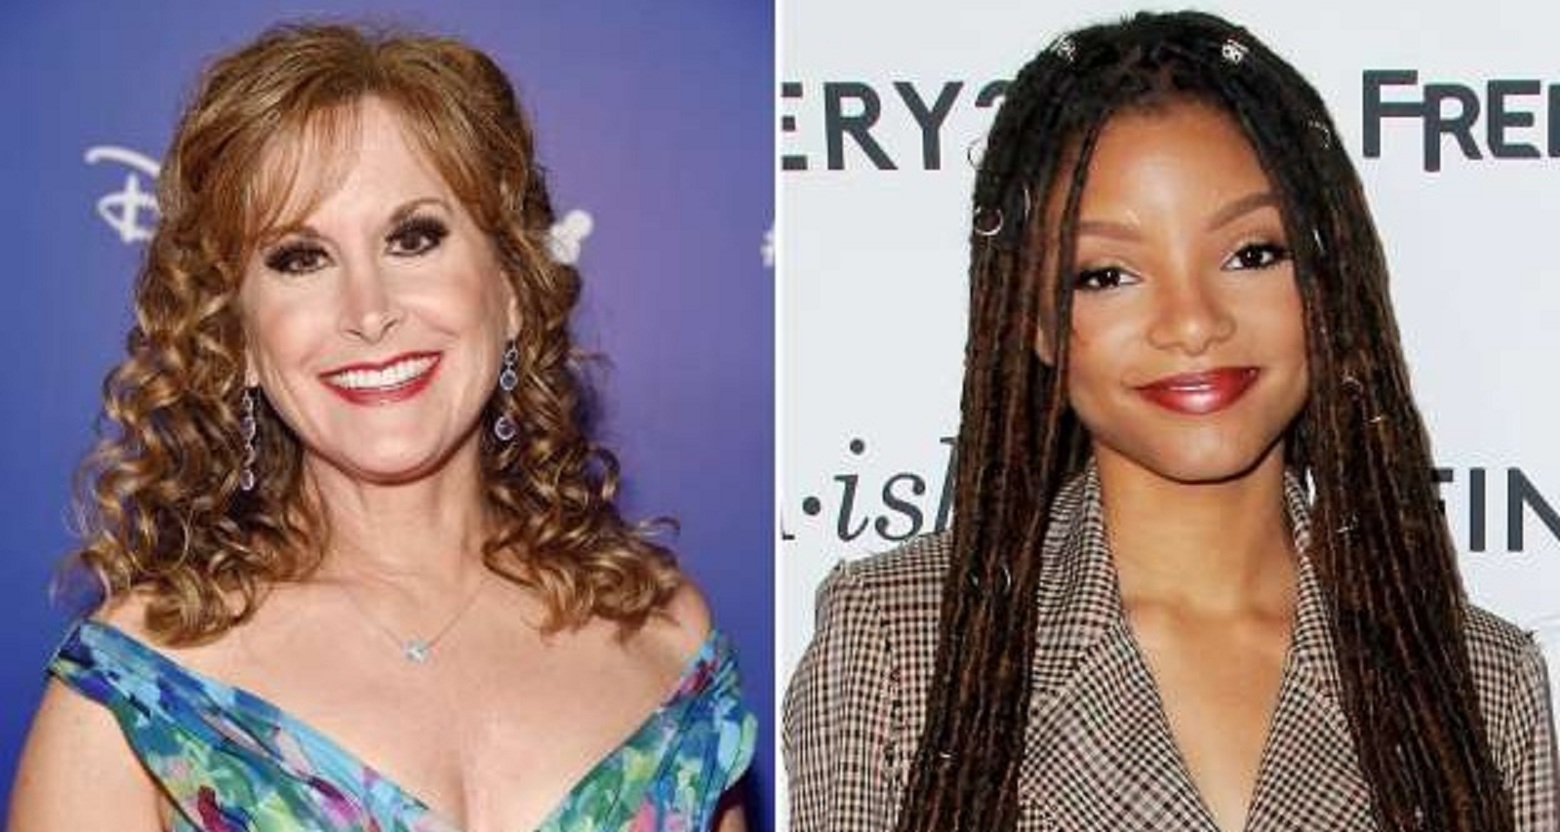 “Original” Ariel Jodi Benson Comes Out In Support Of Halle Bailey’s ‘Little Mermaid’ Casting